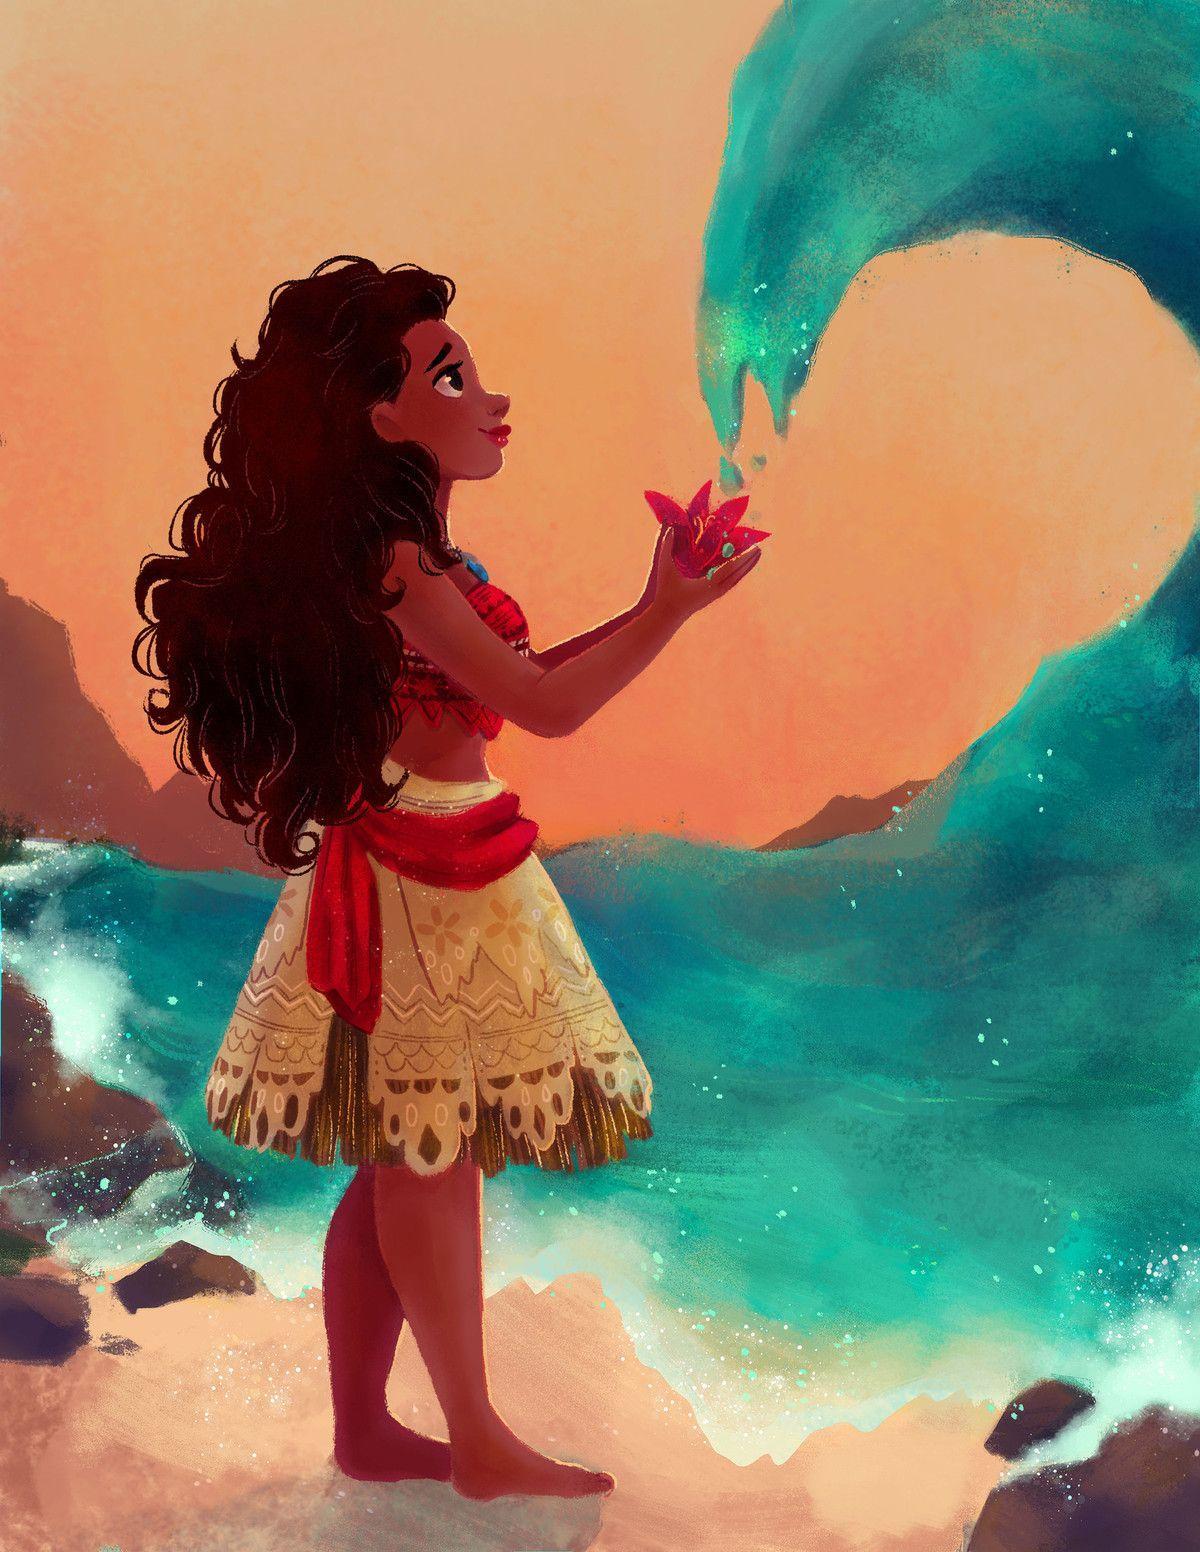 Moana Movie Wallpapers Wallpaper Cave